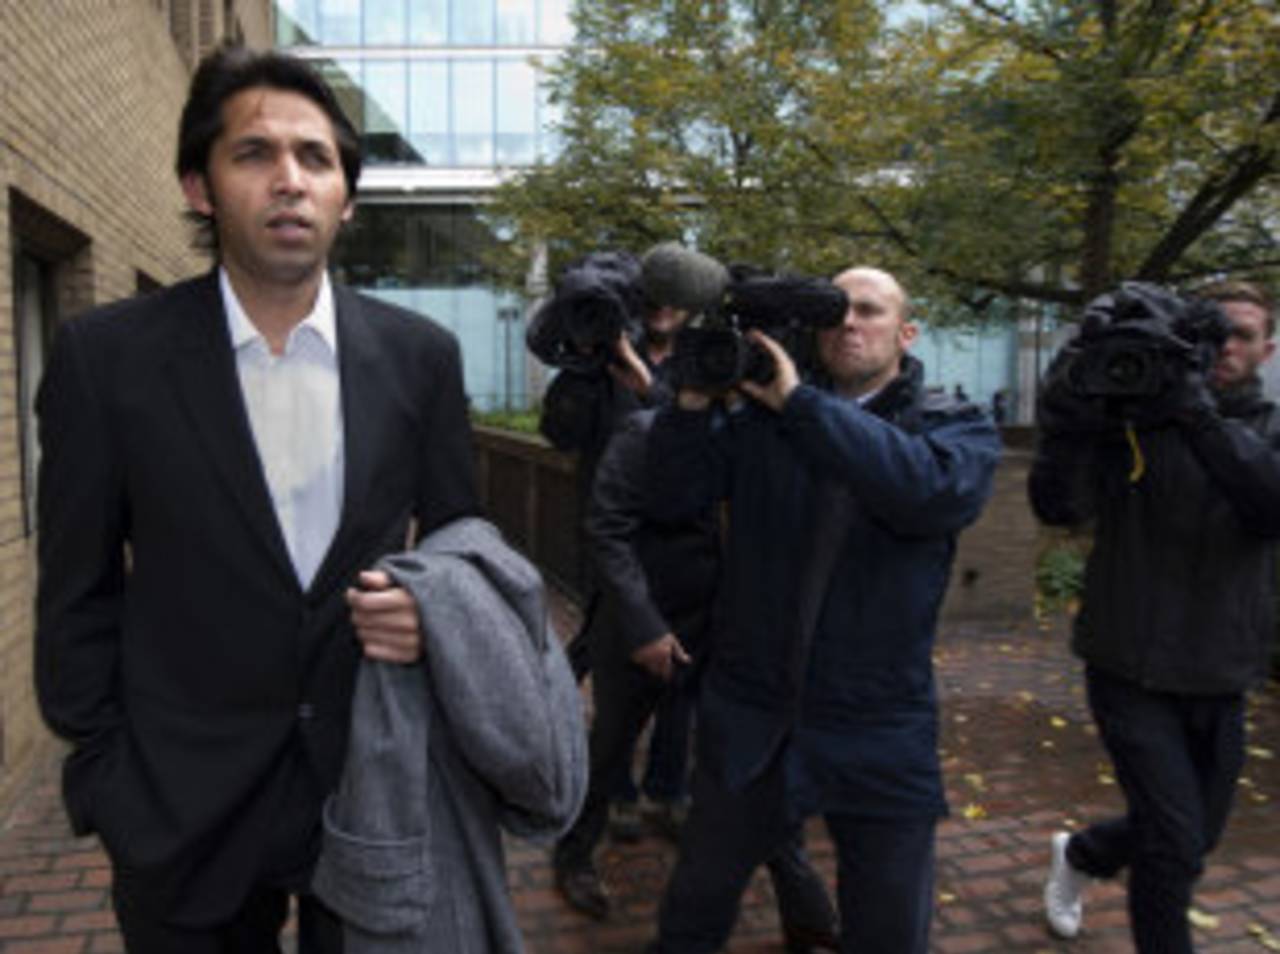 Mohammad Asif arrives at the Southwark Crown Court to hear the verdicts, London, November 1, 2011